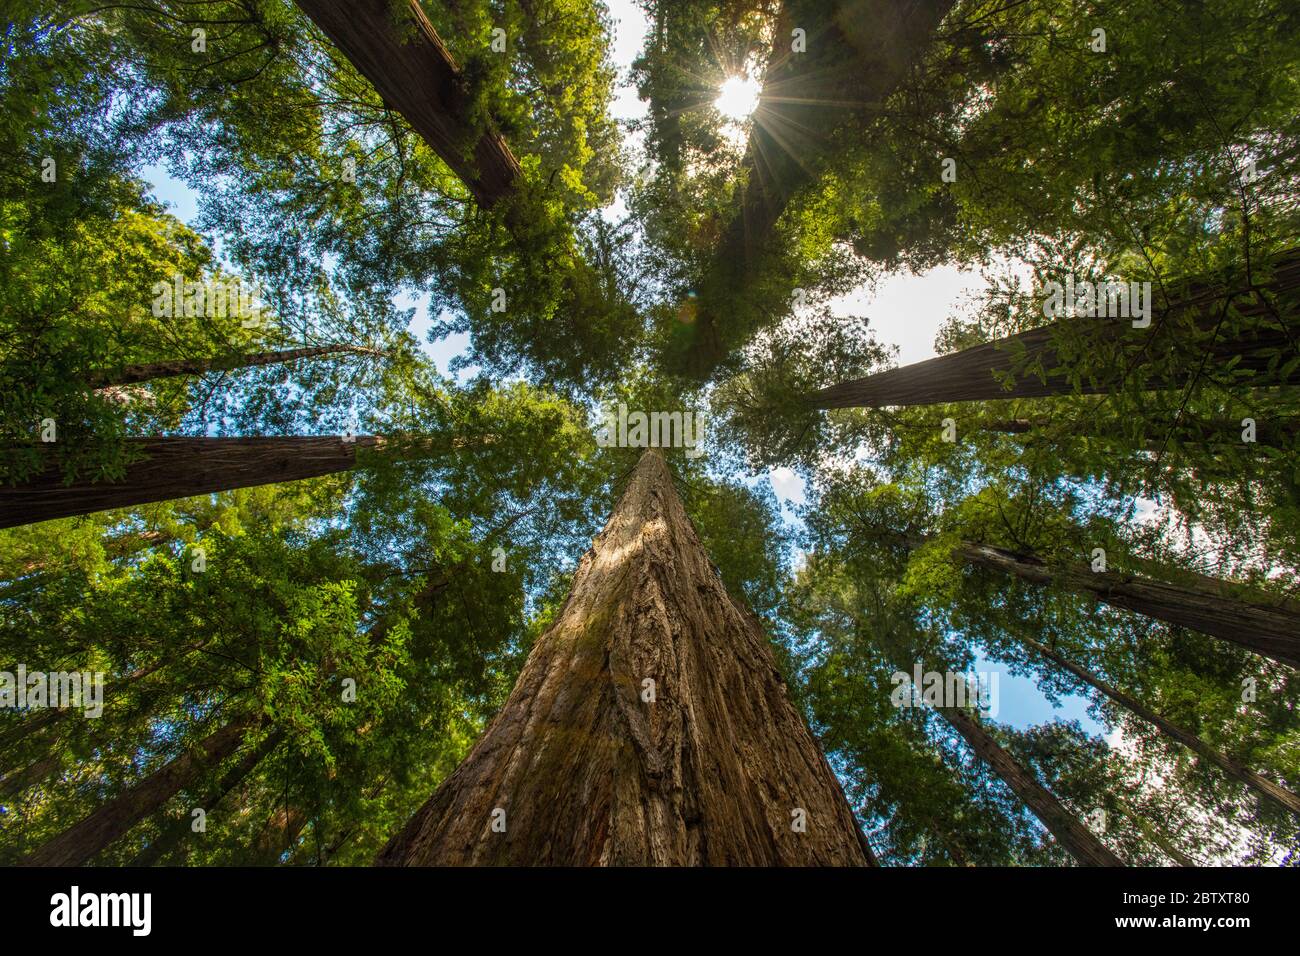 View looking up at a huge California redwood tree (Coast Redwood) in Humboldt State Park, California, USA Stock Photo